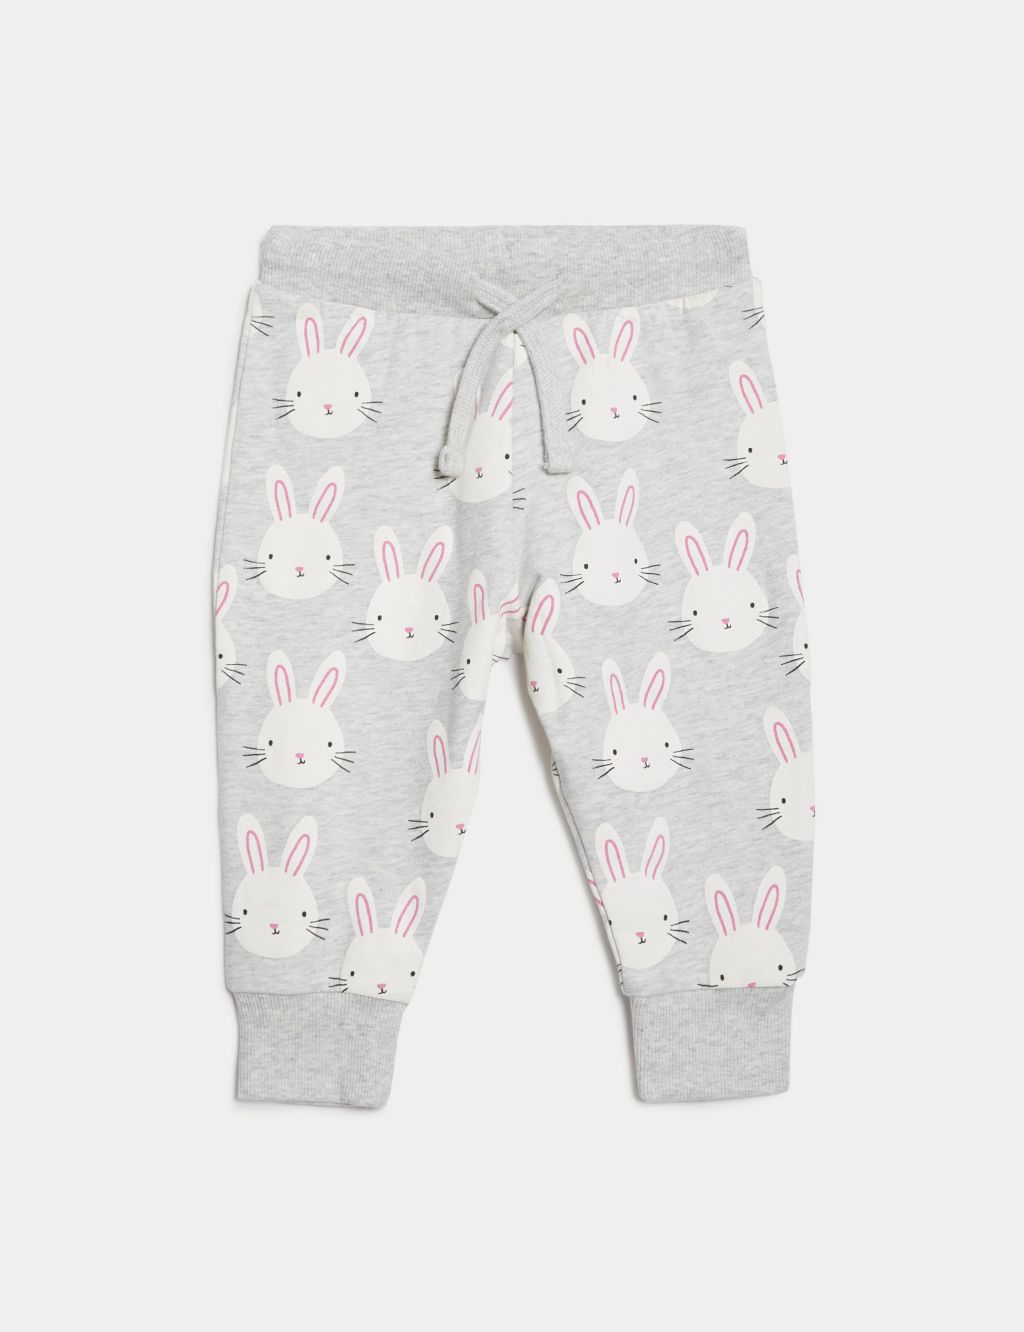 2pc Cotton Rich Bunny Print Outfit (0-3 Yrs) image 4